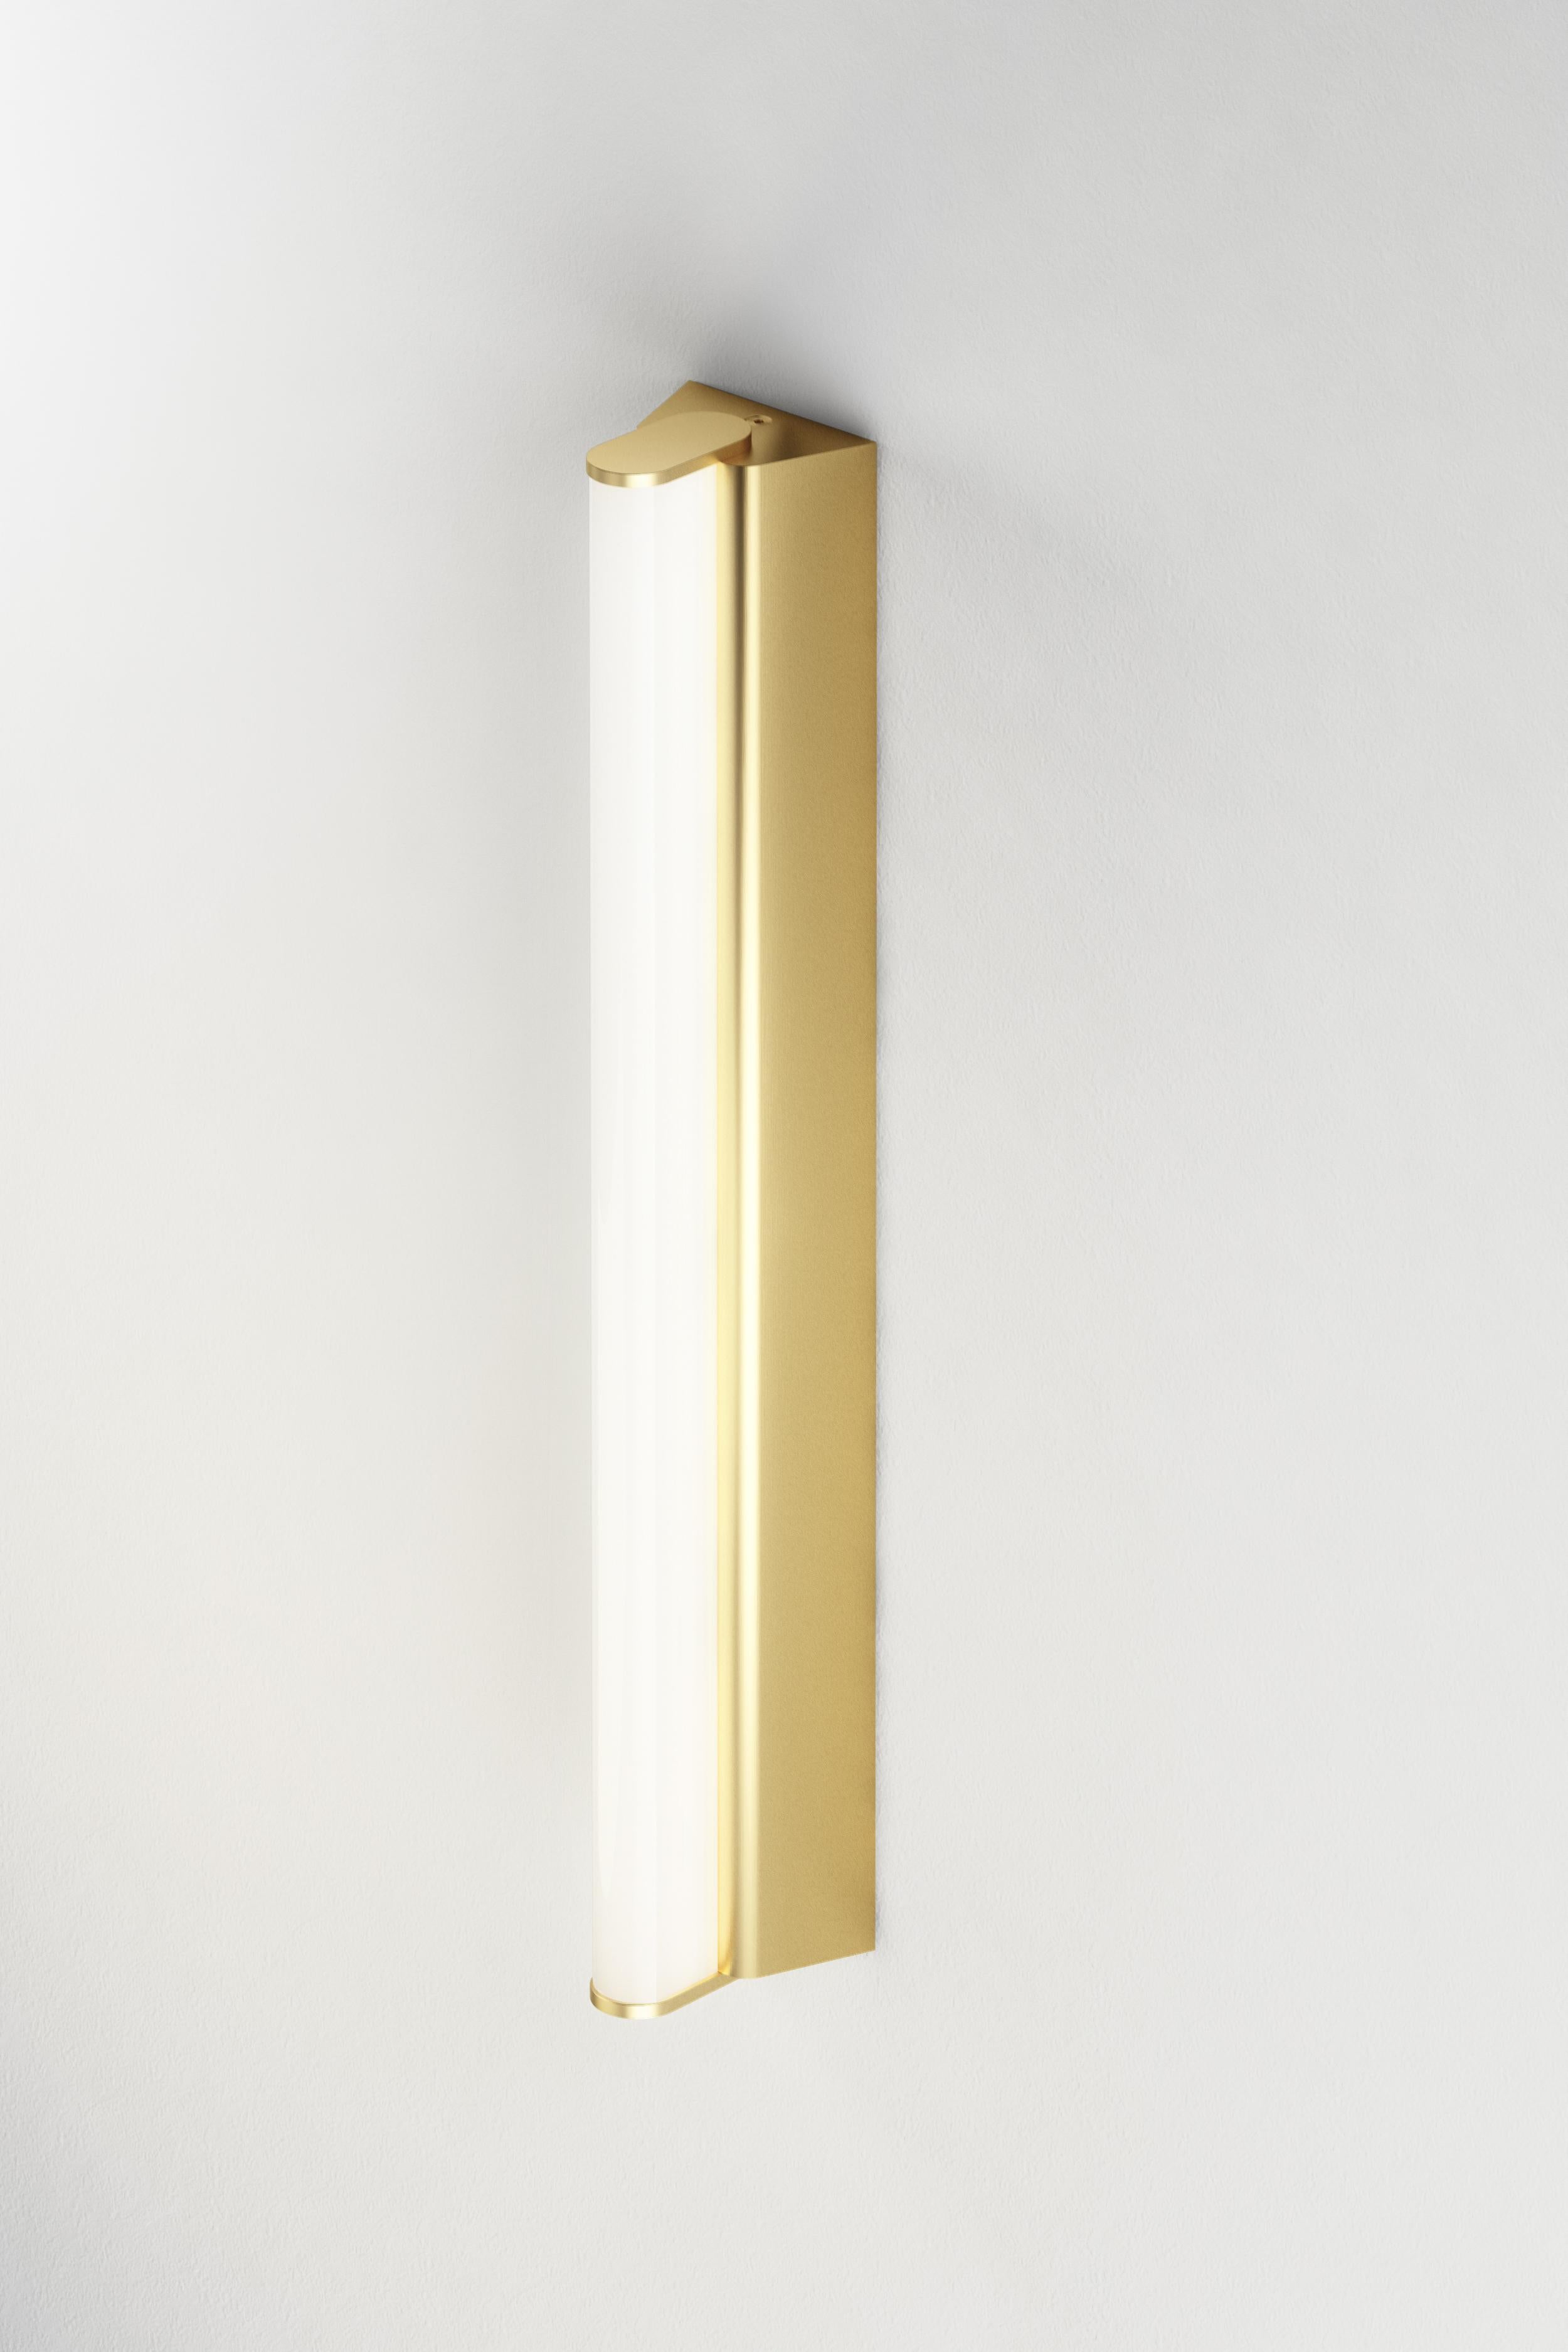 IP Metrop 325 Polished Brass Wall Light by Emilie Cathelineau In New Condition For Sale In Geneve, CH